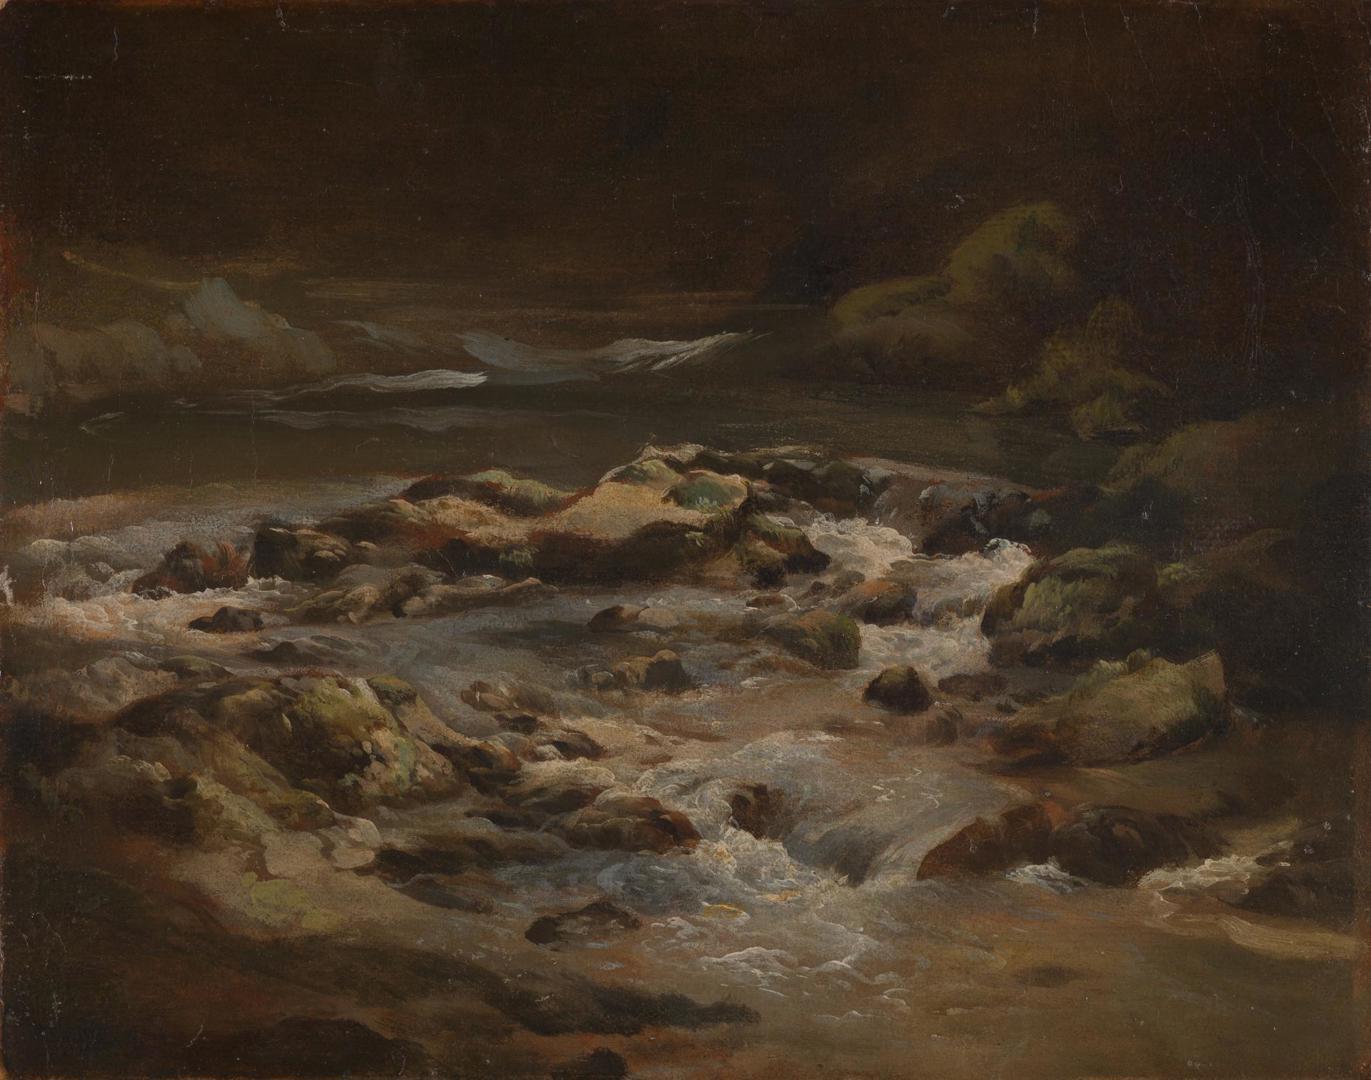 A Trout Stream by Philip Reinagle